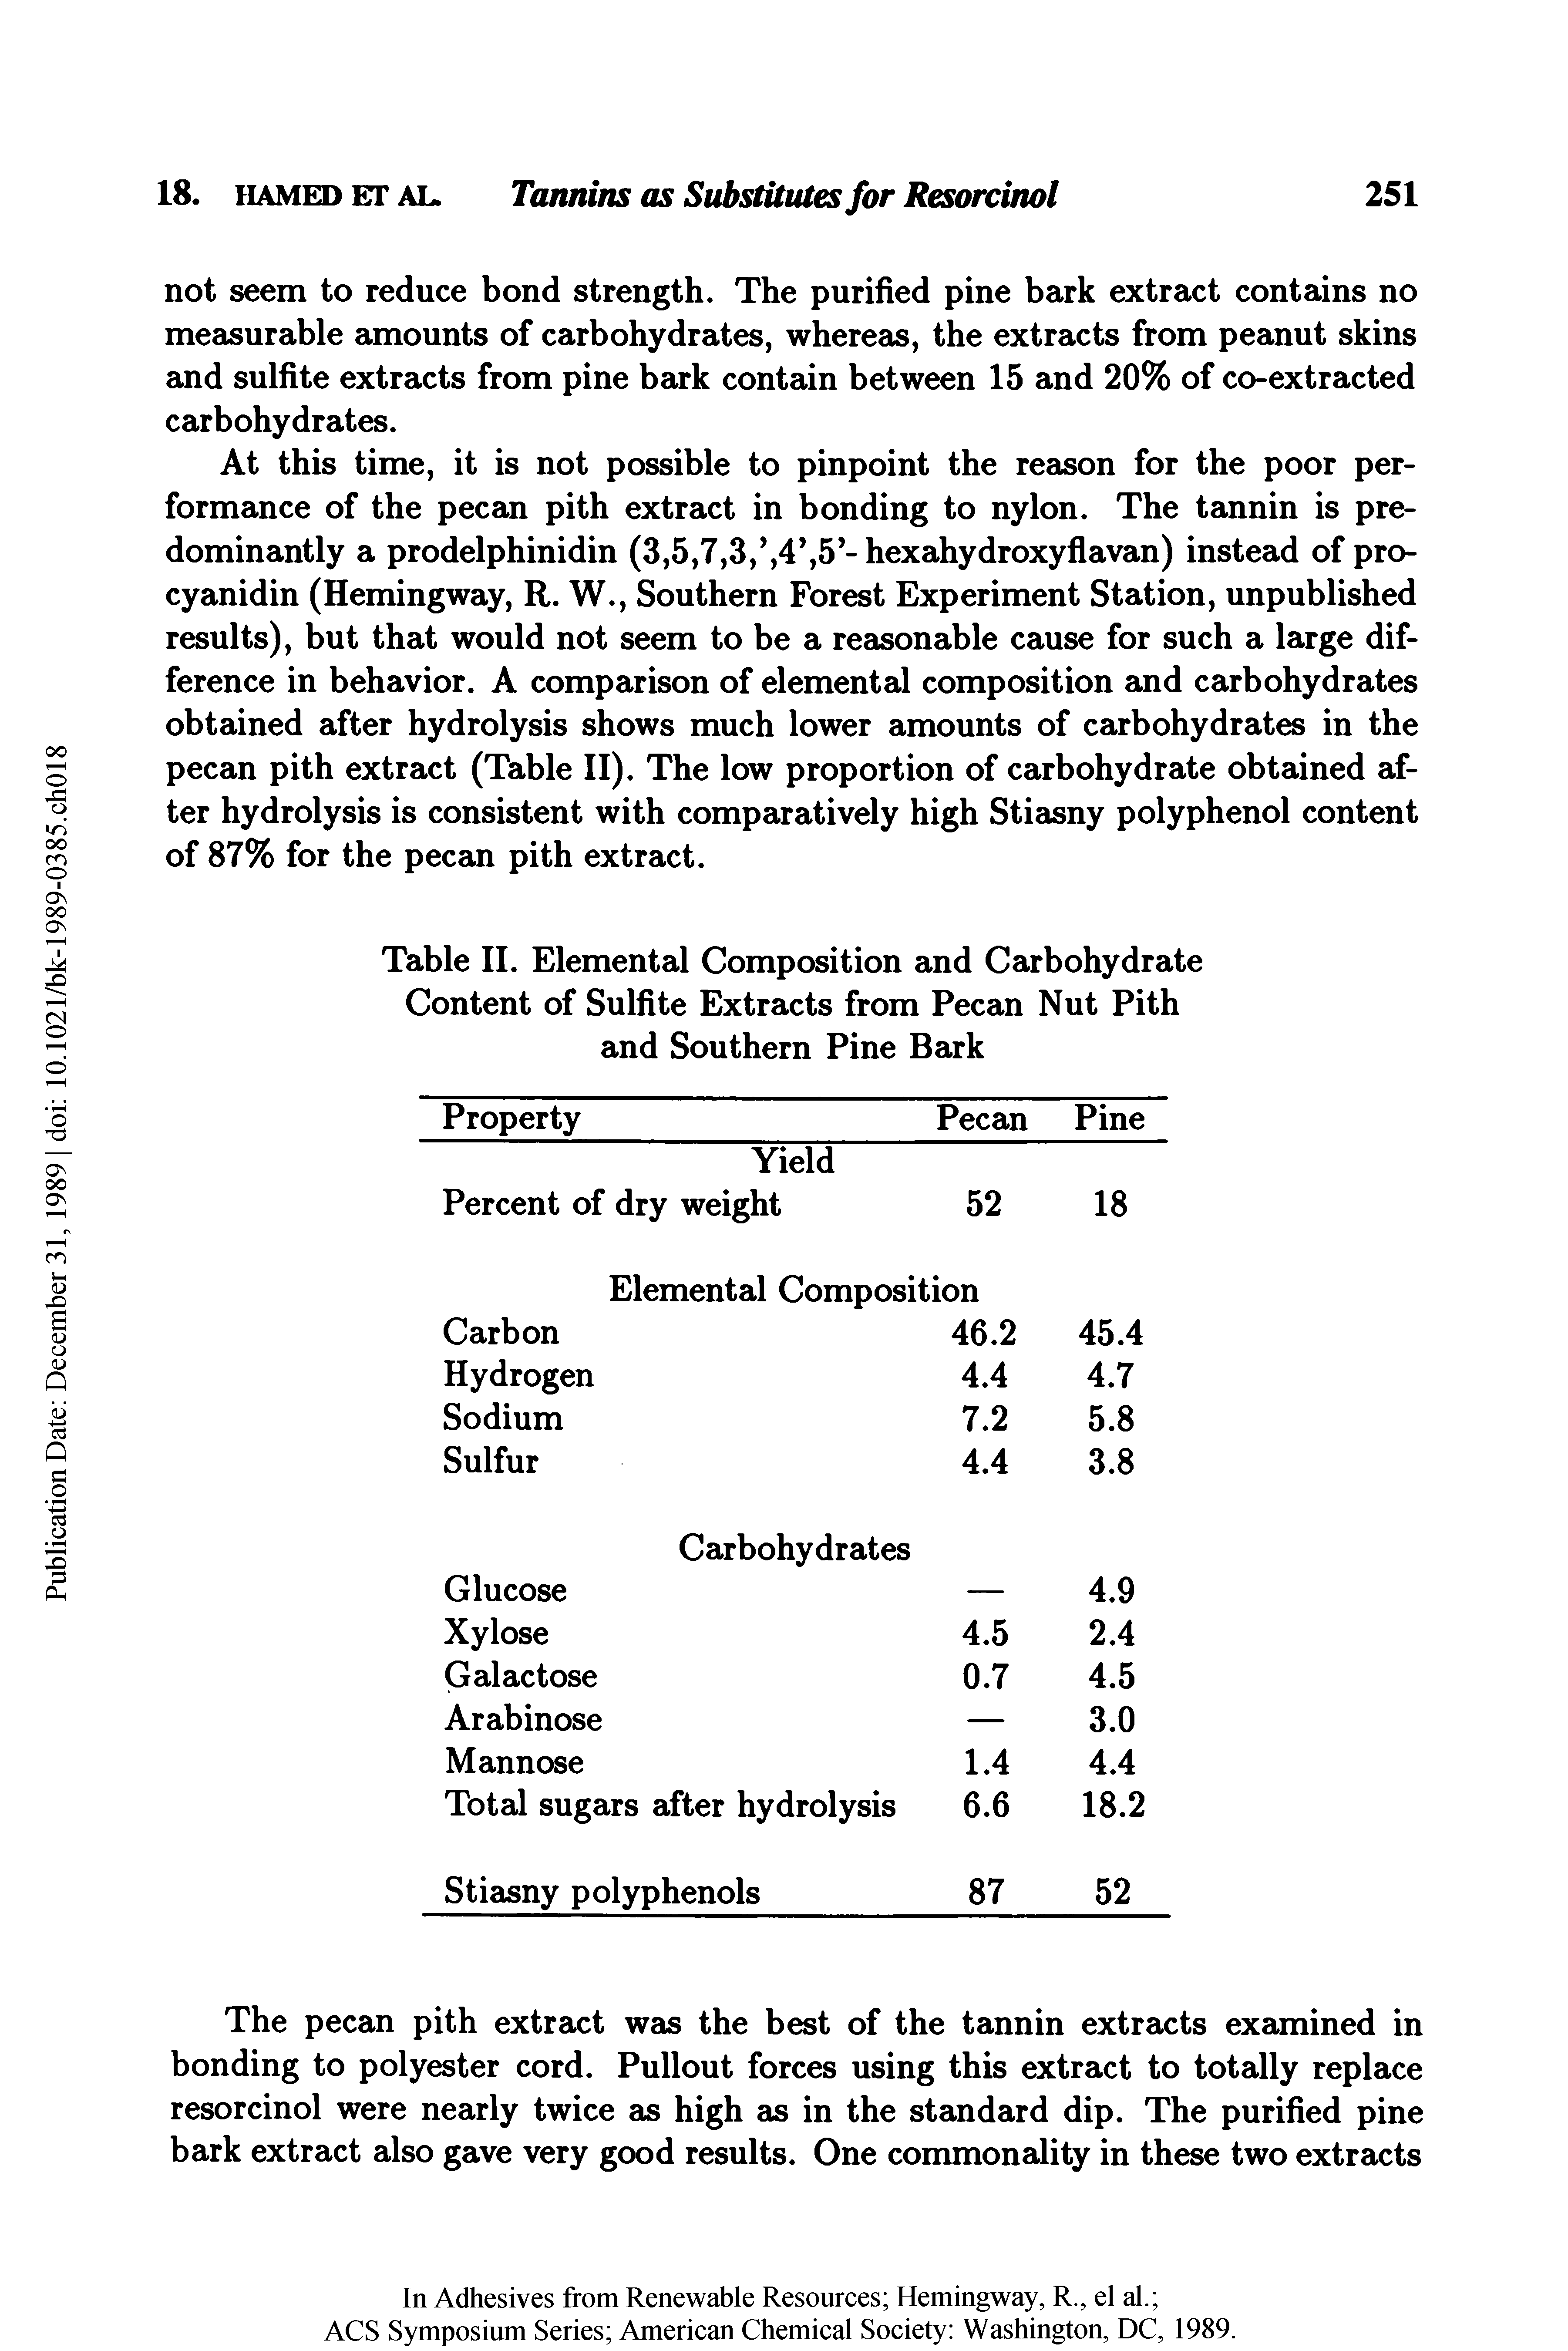 Table II. Elemental Composition and Carbohydrate Content of Sulfite Extracts from Pecan Nut Pith and Southern Pine Bark...